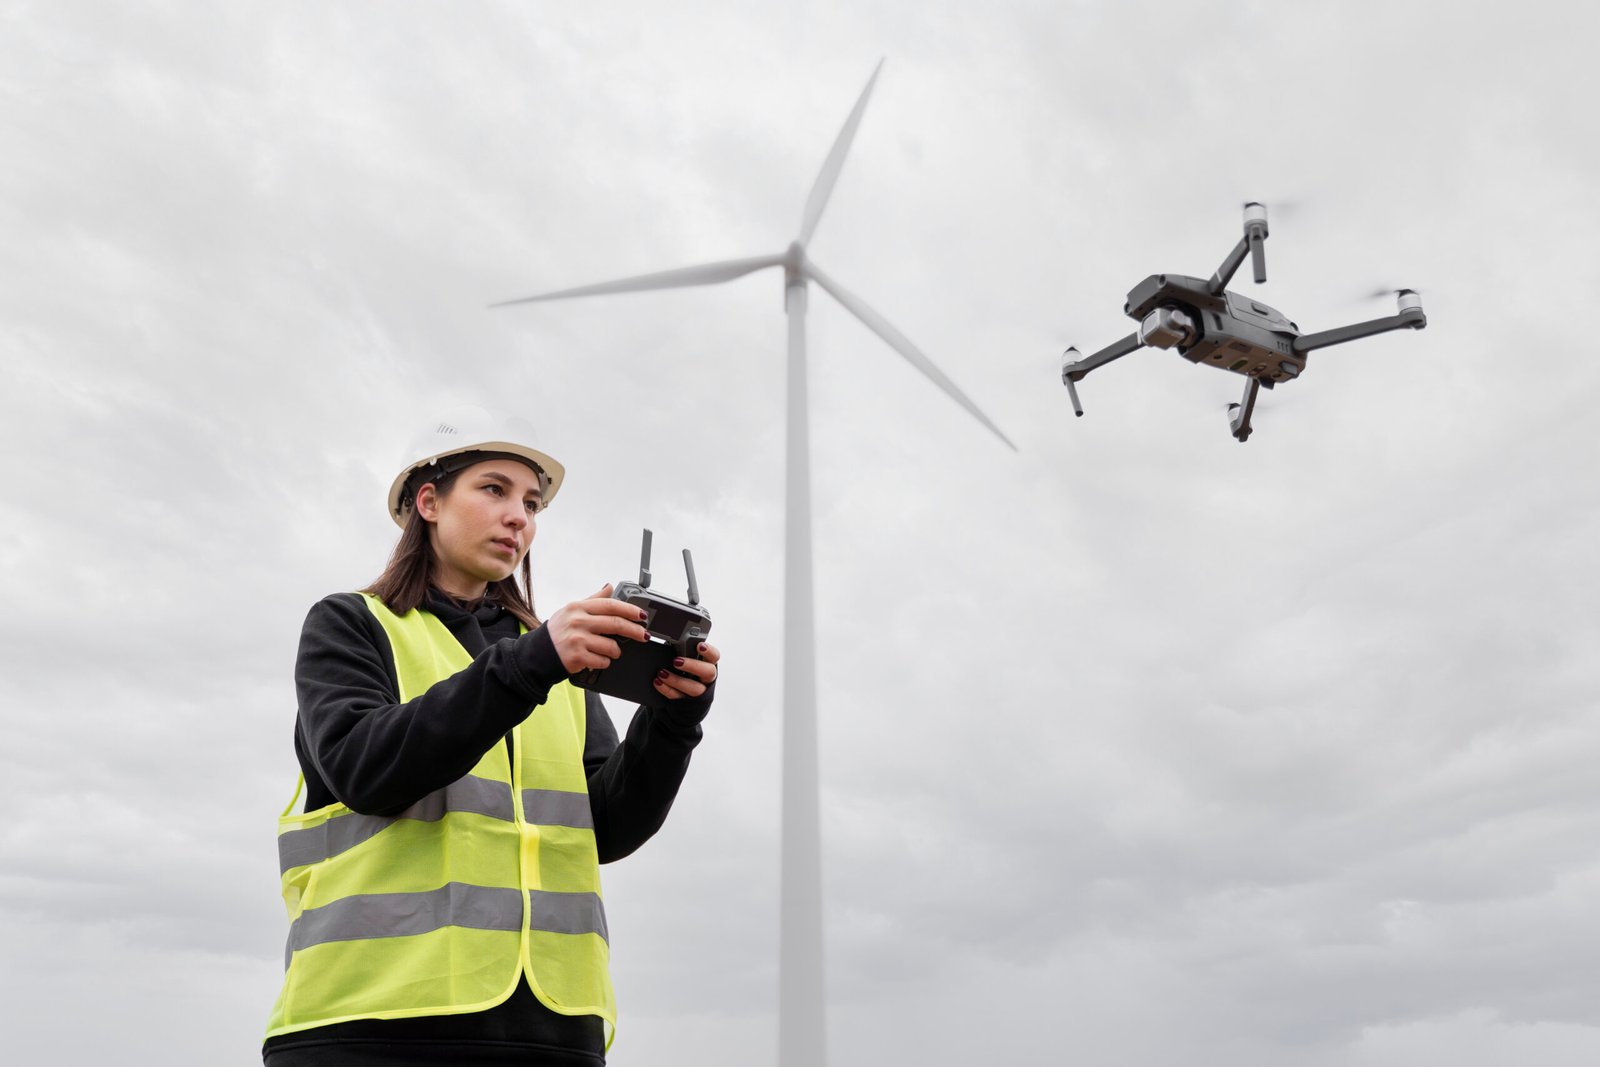 Drones in Industry: From Delivery to Surveillance